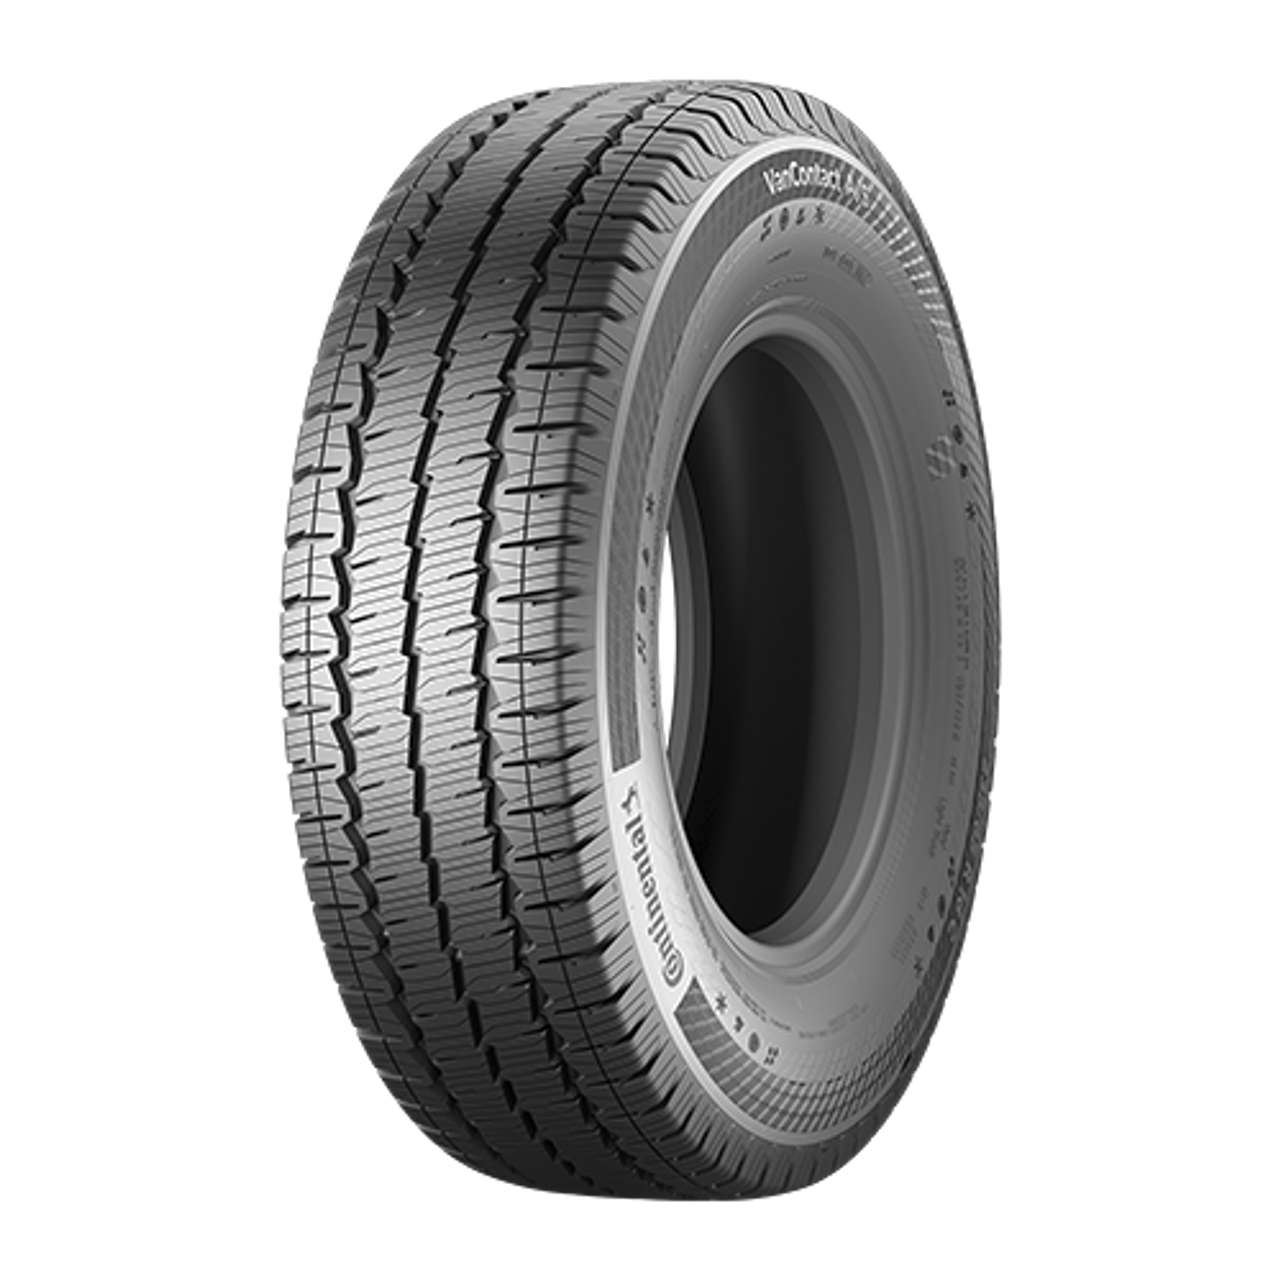 CONTINENTAL VANCONTACT A/S 235/55R17 103H BSW XL